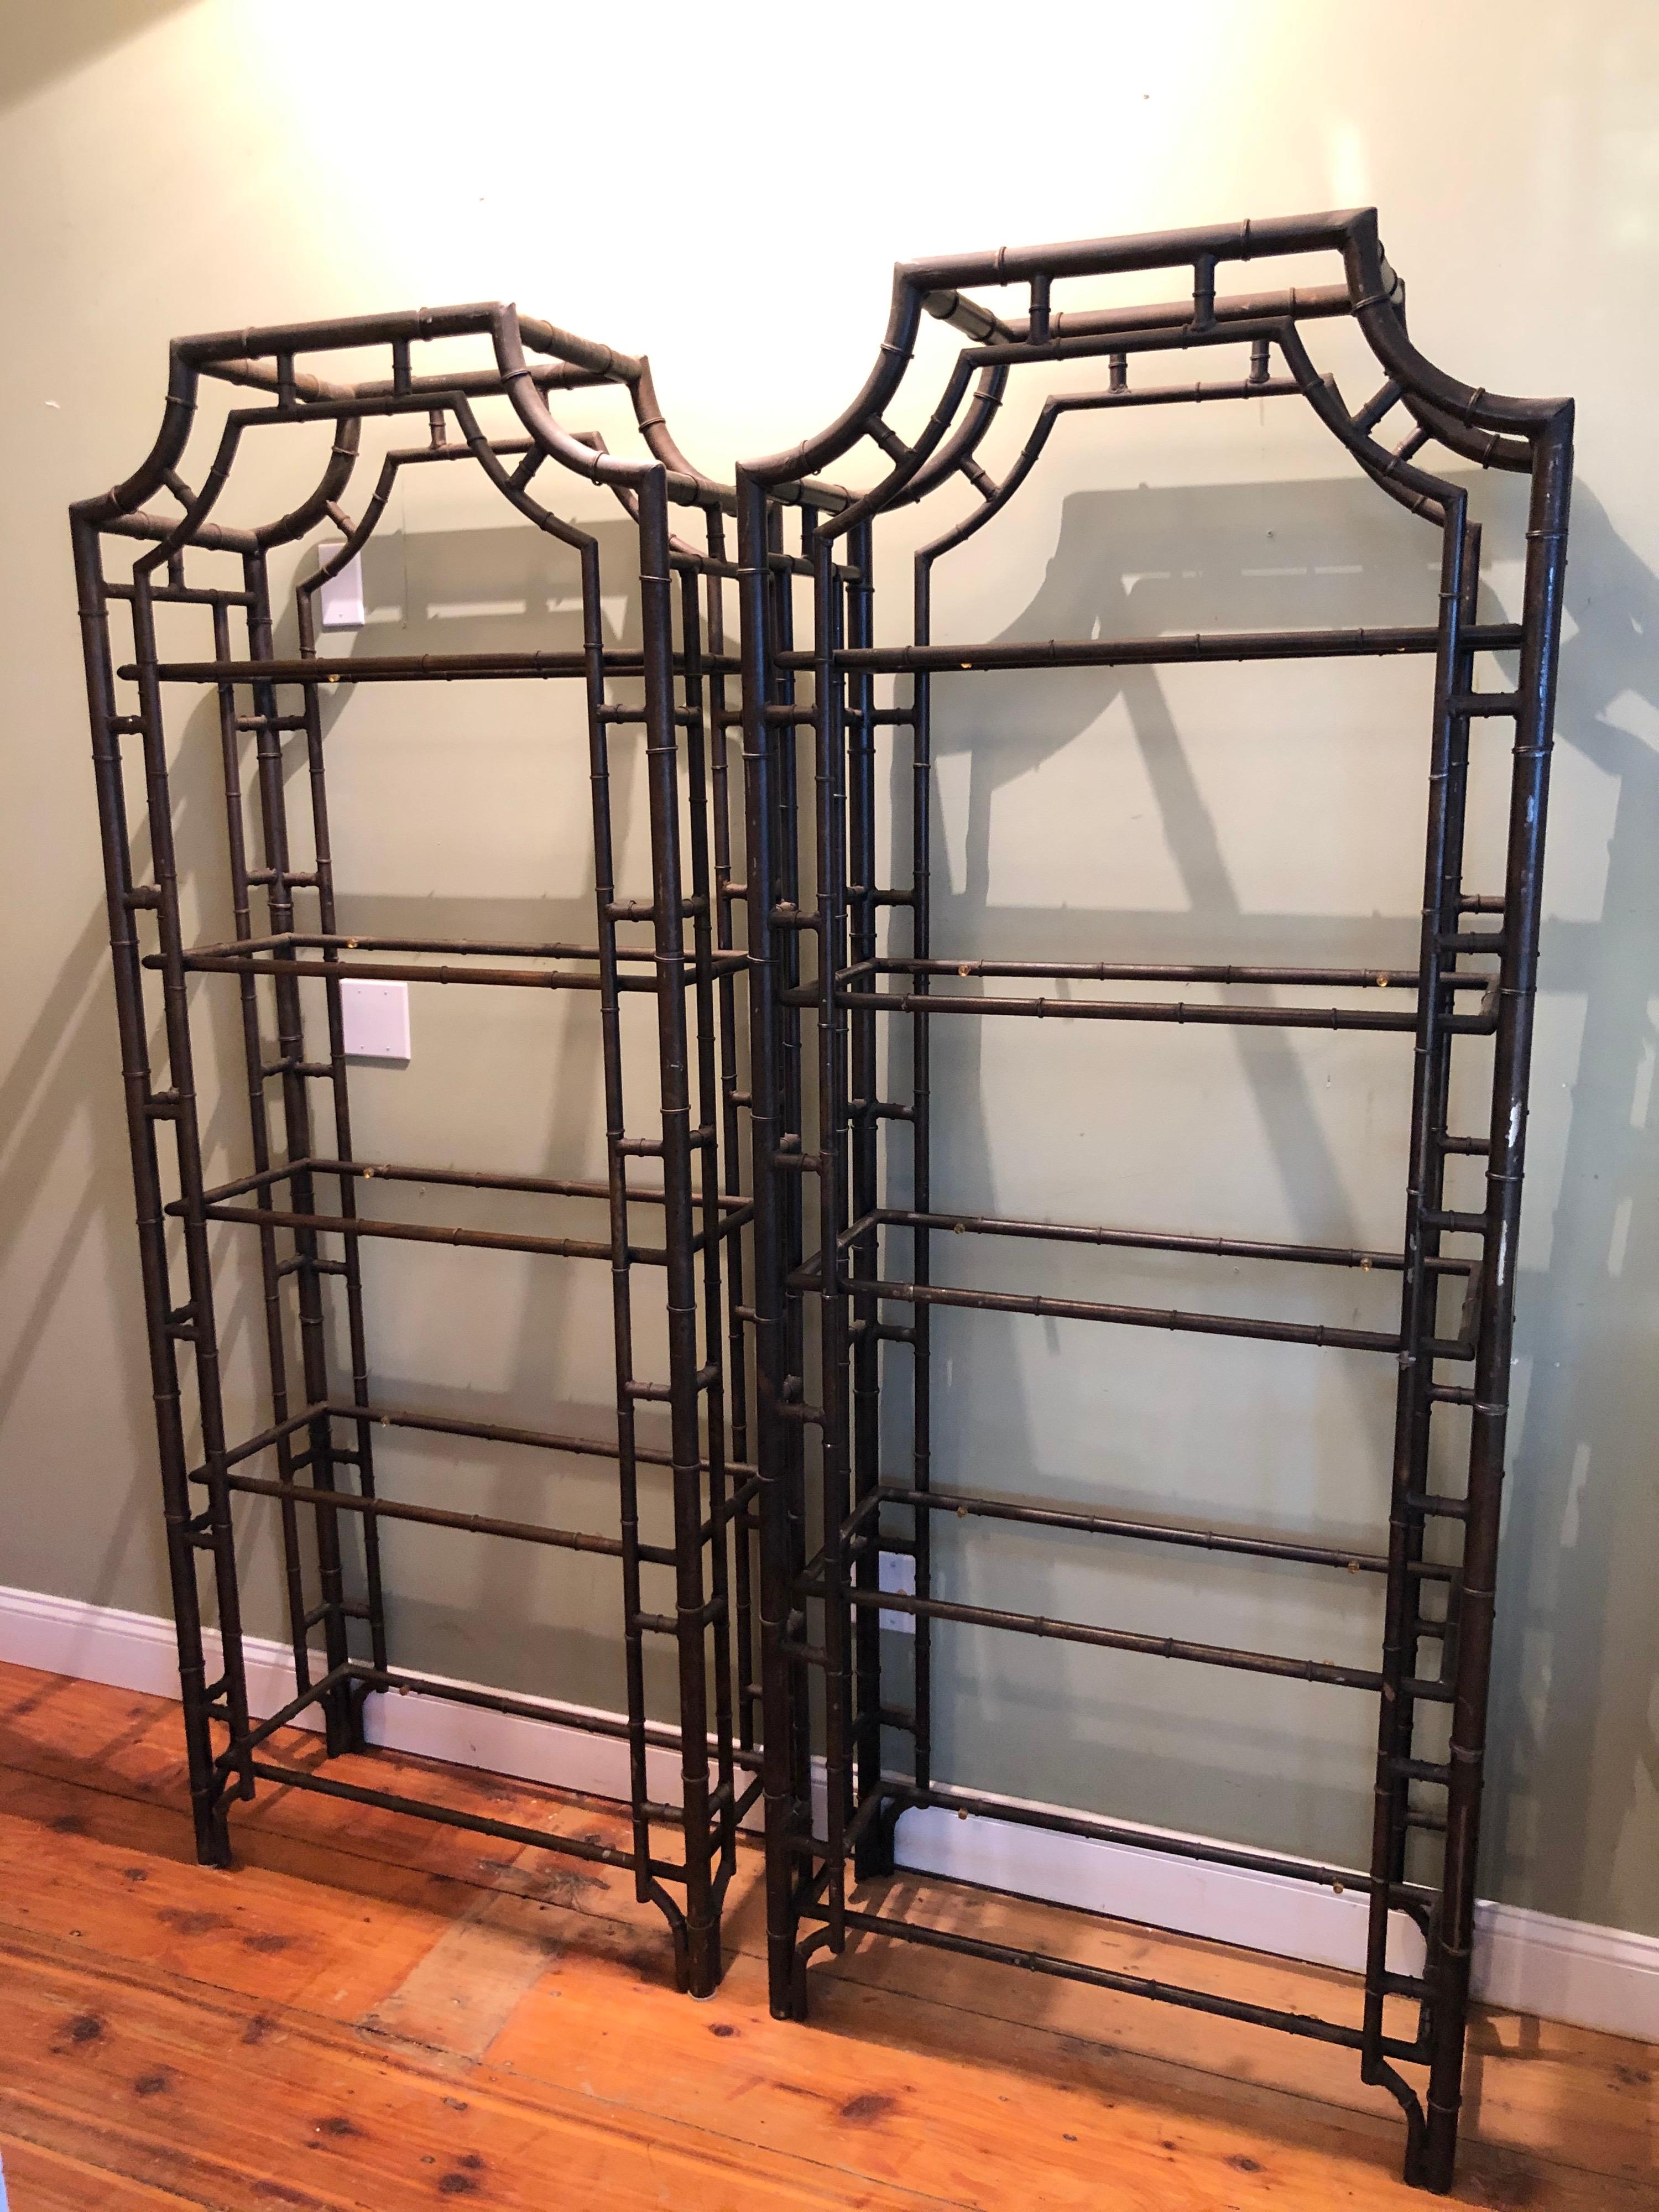 Pair of faux bamboo Pagoda étagères. Extremely well made heavy iron étagères. Comes with five glass shelves on each étagère. Has a dark brown oiled looking finish with tiny black spots. We have the glass but did not place in photos. Please request